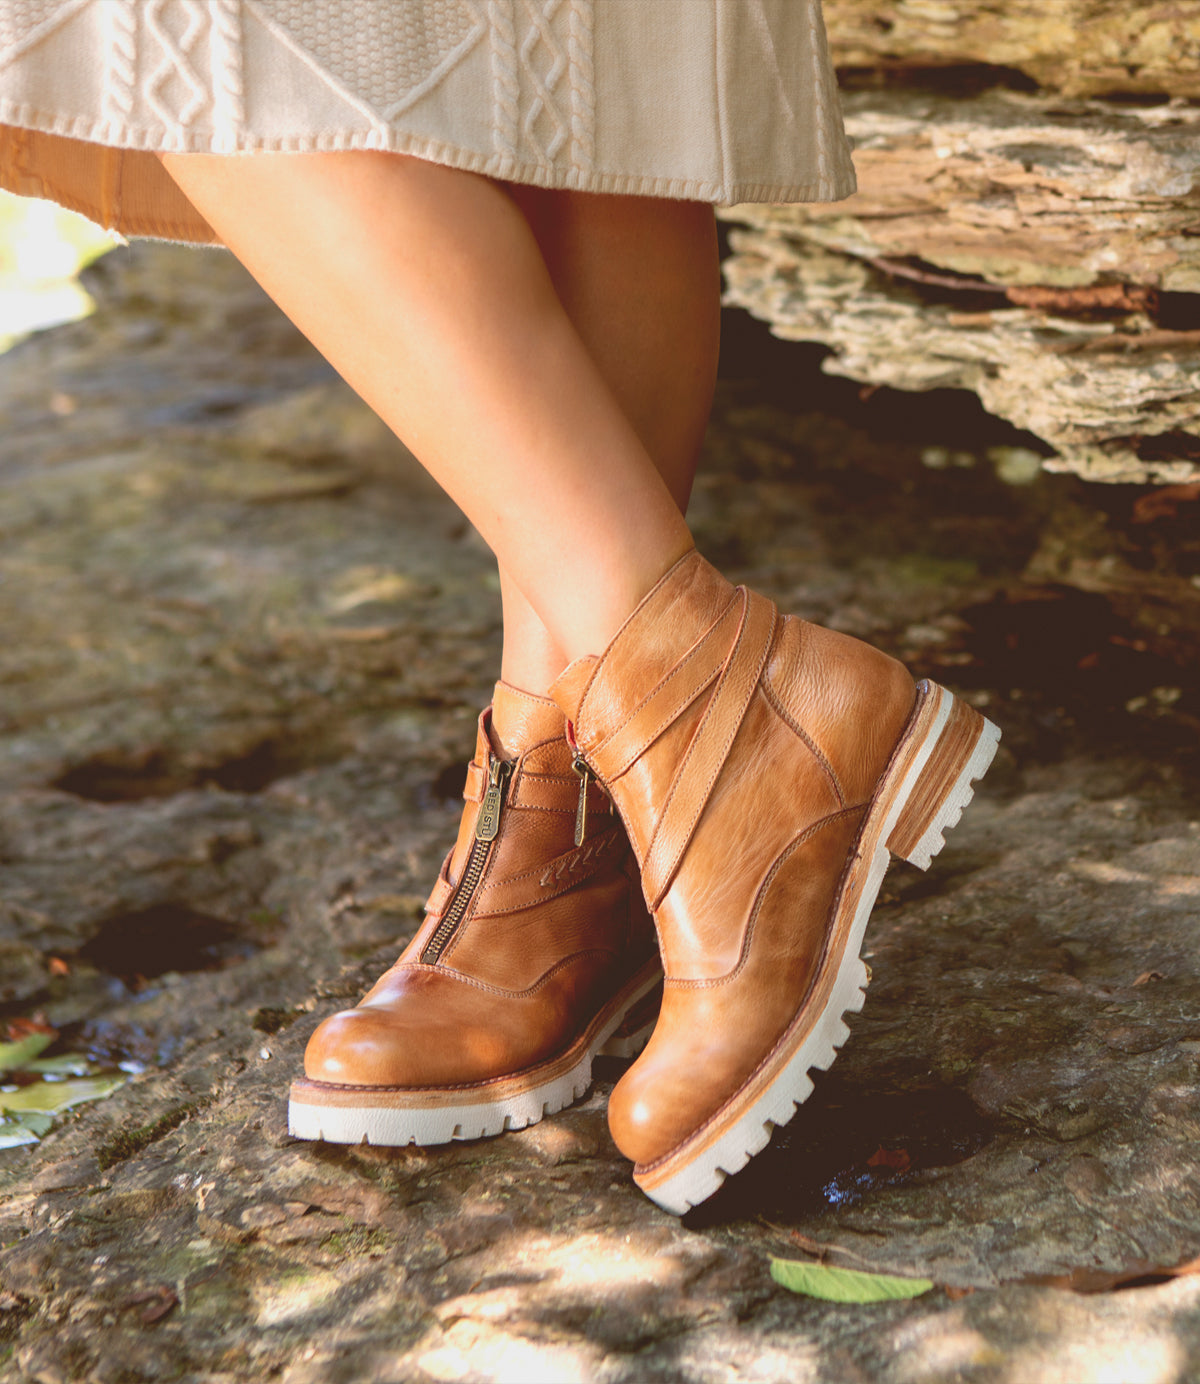 A woman wearing lightweight tan leather Bed Stu Dessa ankle boots standing on a rock.